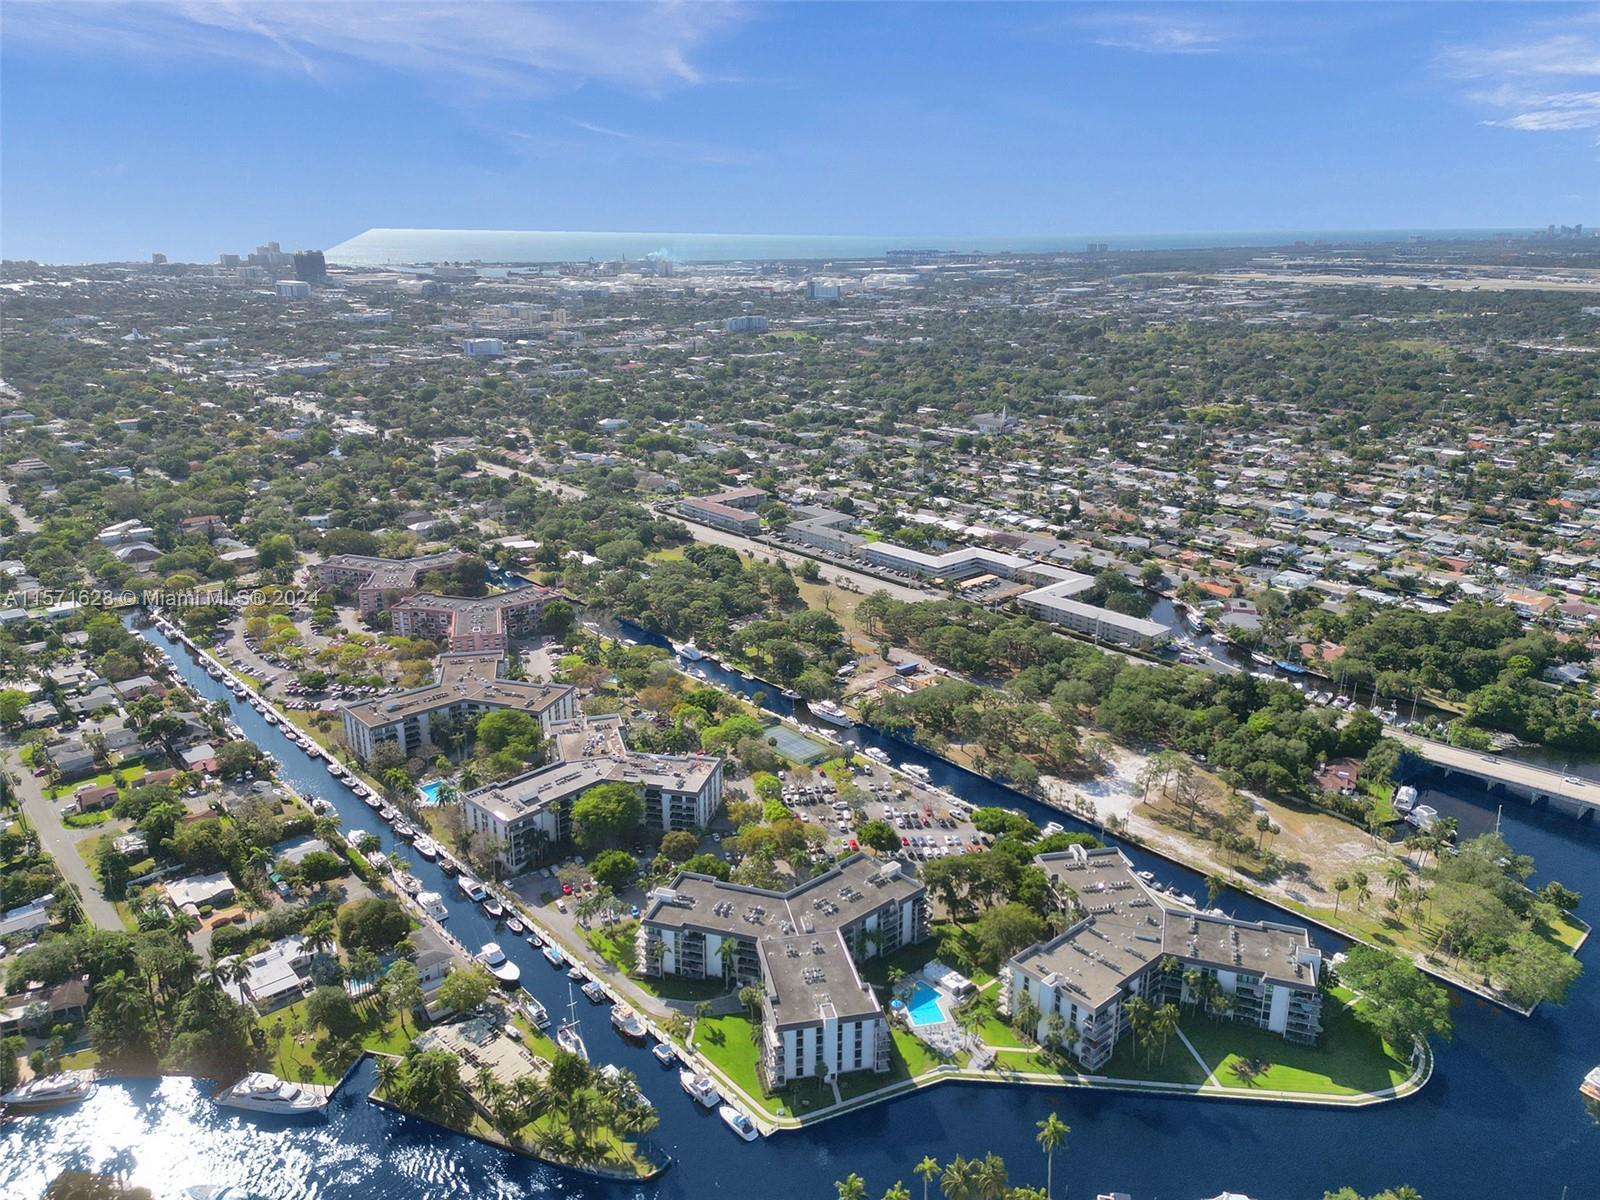 Location with a gated waterfront community,  easy access to downtown, las Olas and just north of air